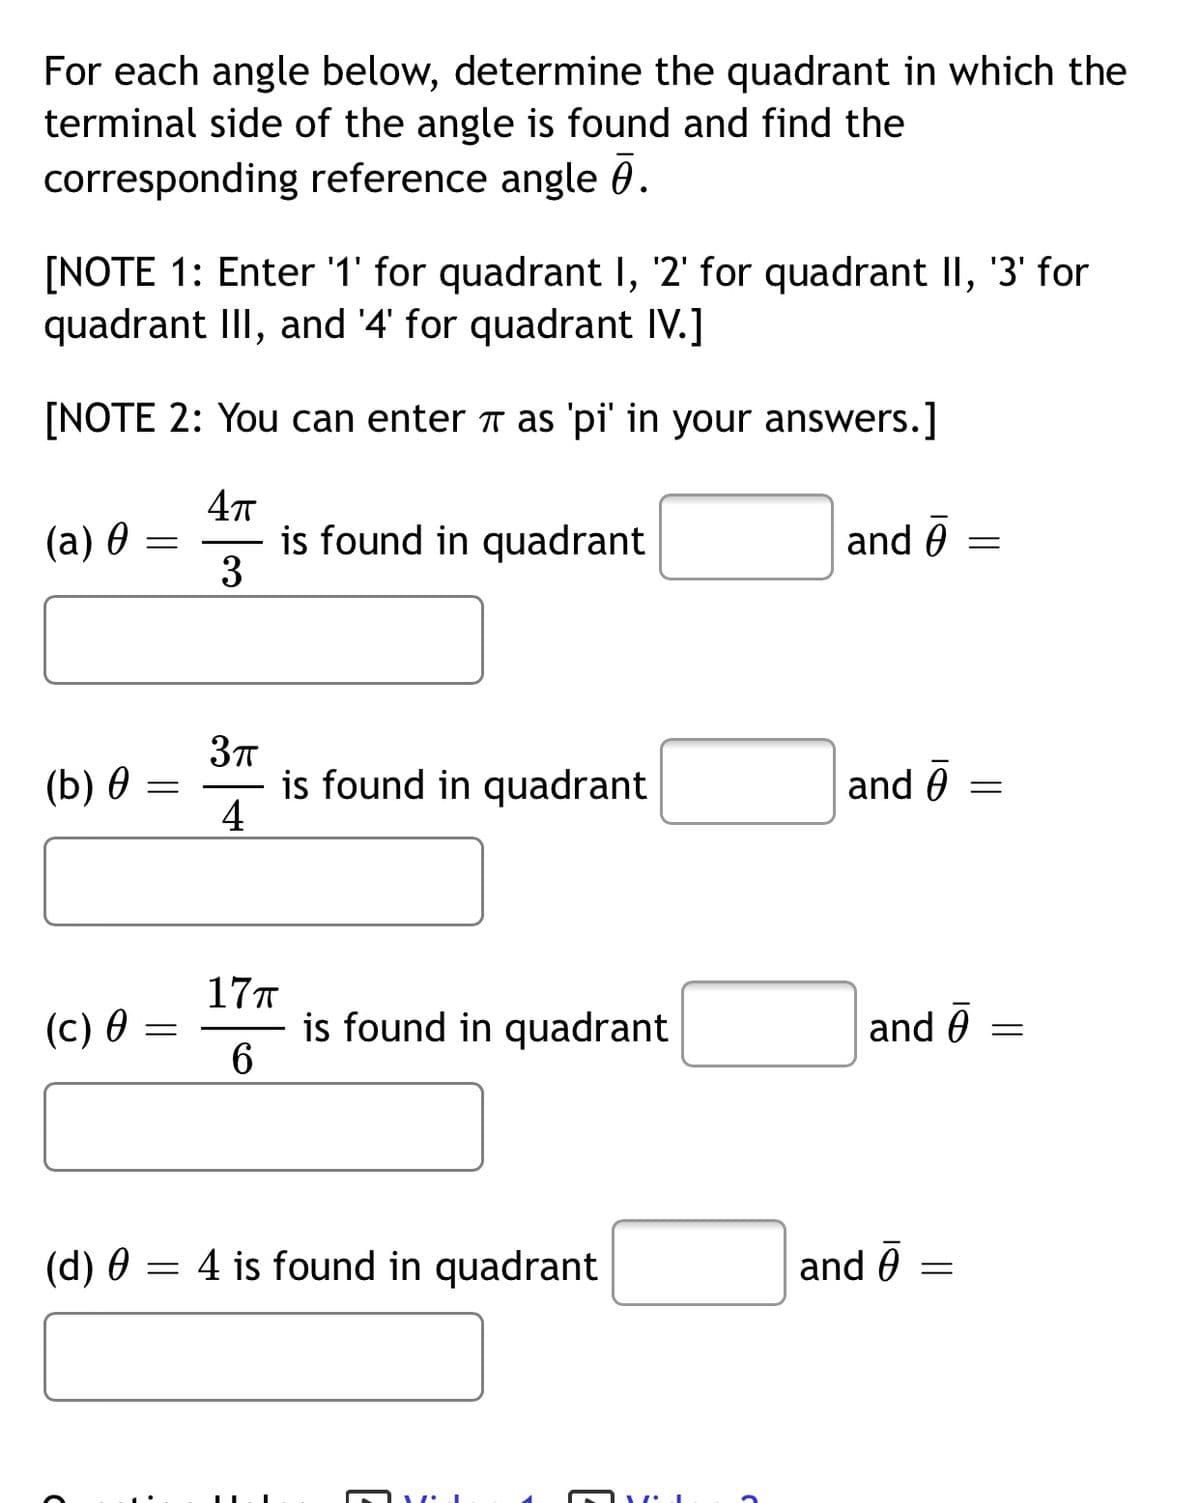 For each angle below, determine the quadrant in which the
terminal side of the angle is found and find the
corresponding reference angle 0.
[NOTE 1: Enter '1' for quadrant I, '2' for quadrant II, '3' for
quadrant III, and '4' for quadrant IV.]
[NOTE 2: You can enter ë as 'pi' in your answers.]
is found in quadrant
3
(a) 0
and 0
(b) ө
is found in quadrant
4
and 6
%3D
17T
is found in quadrant
6.
(c) 0 =
and 0
(d) 0 = 4 is found in quadrant
and ē
